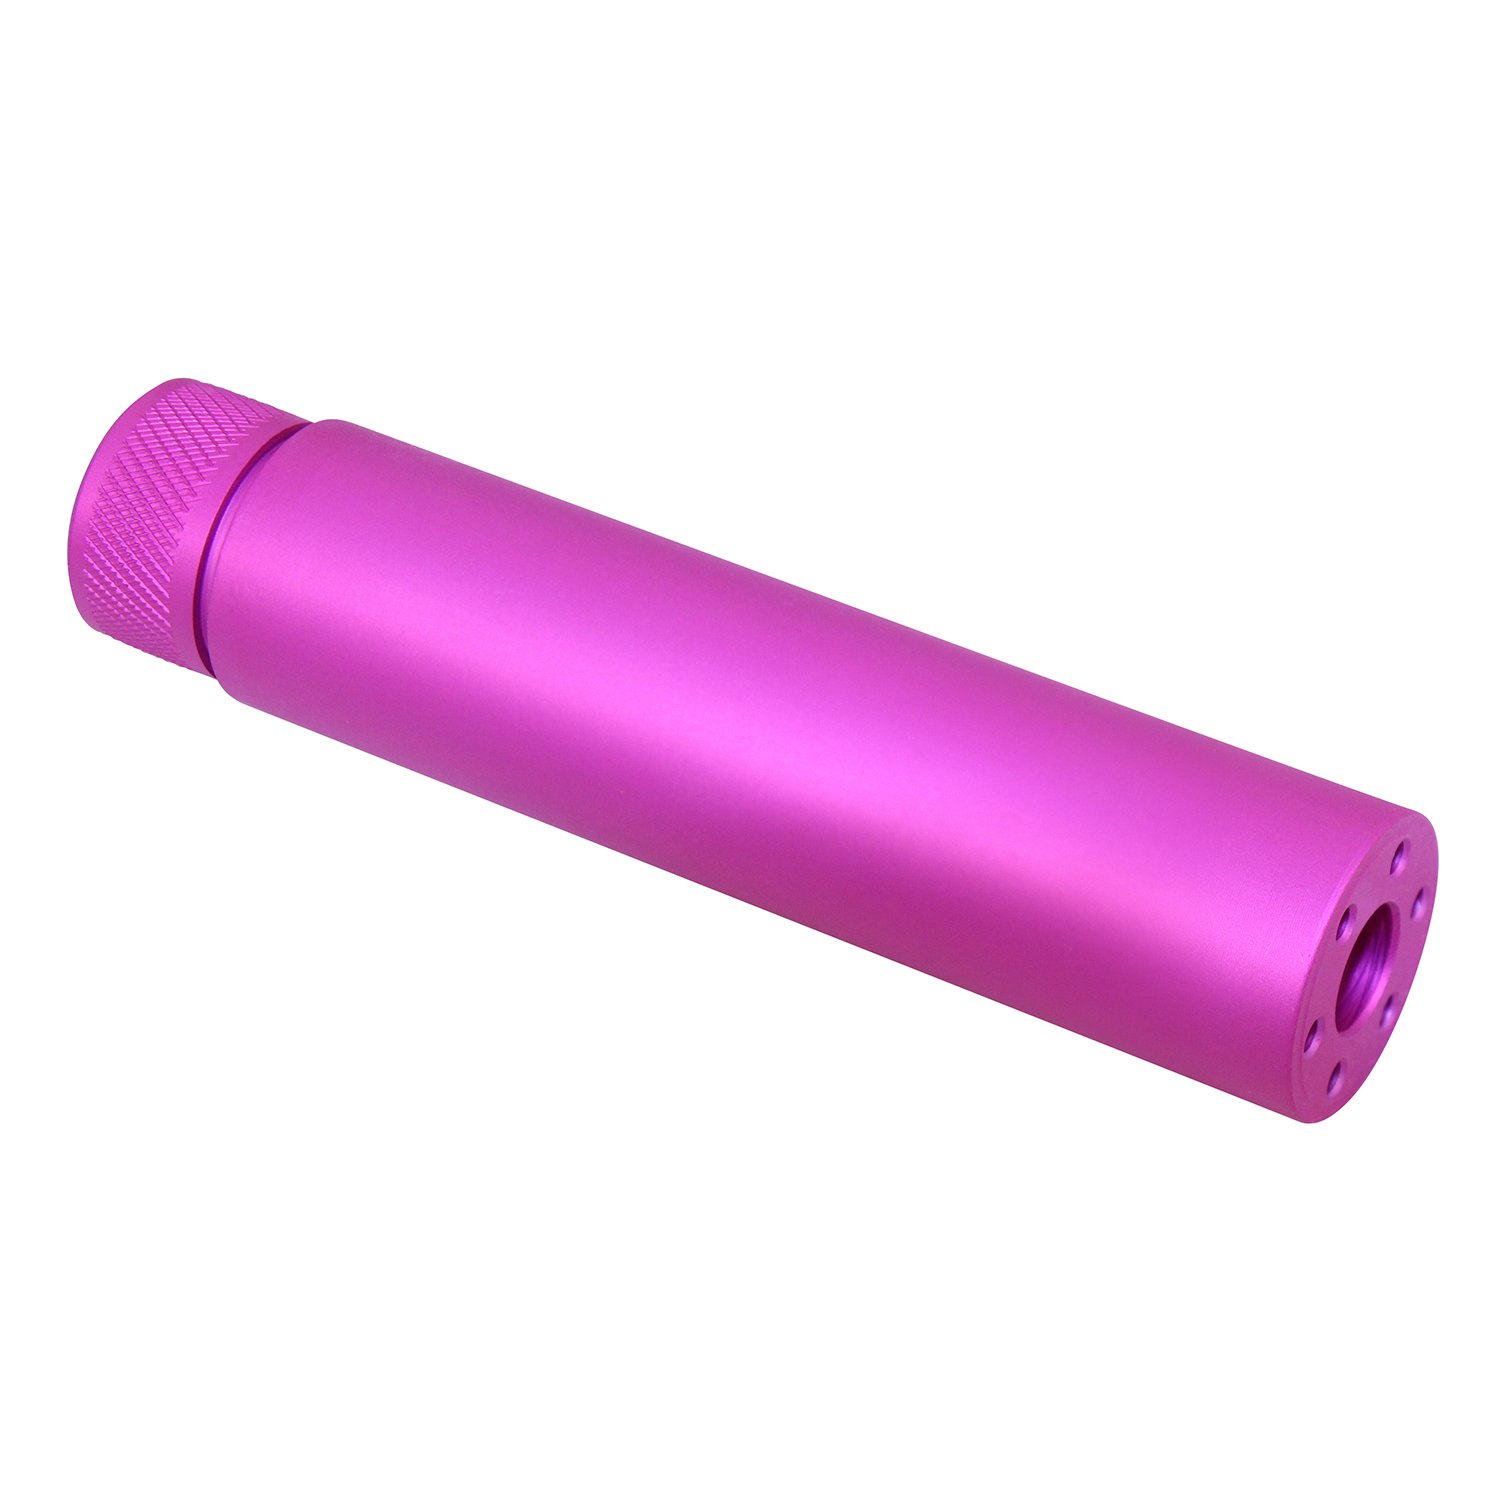 AR-15 5.5'' Fake Suppressor in Anodized Pink